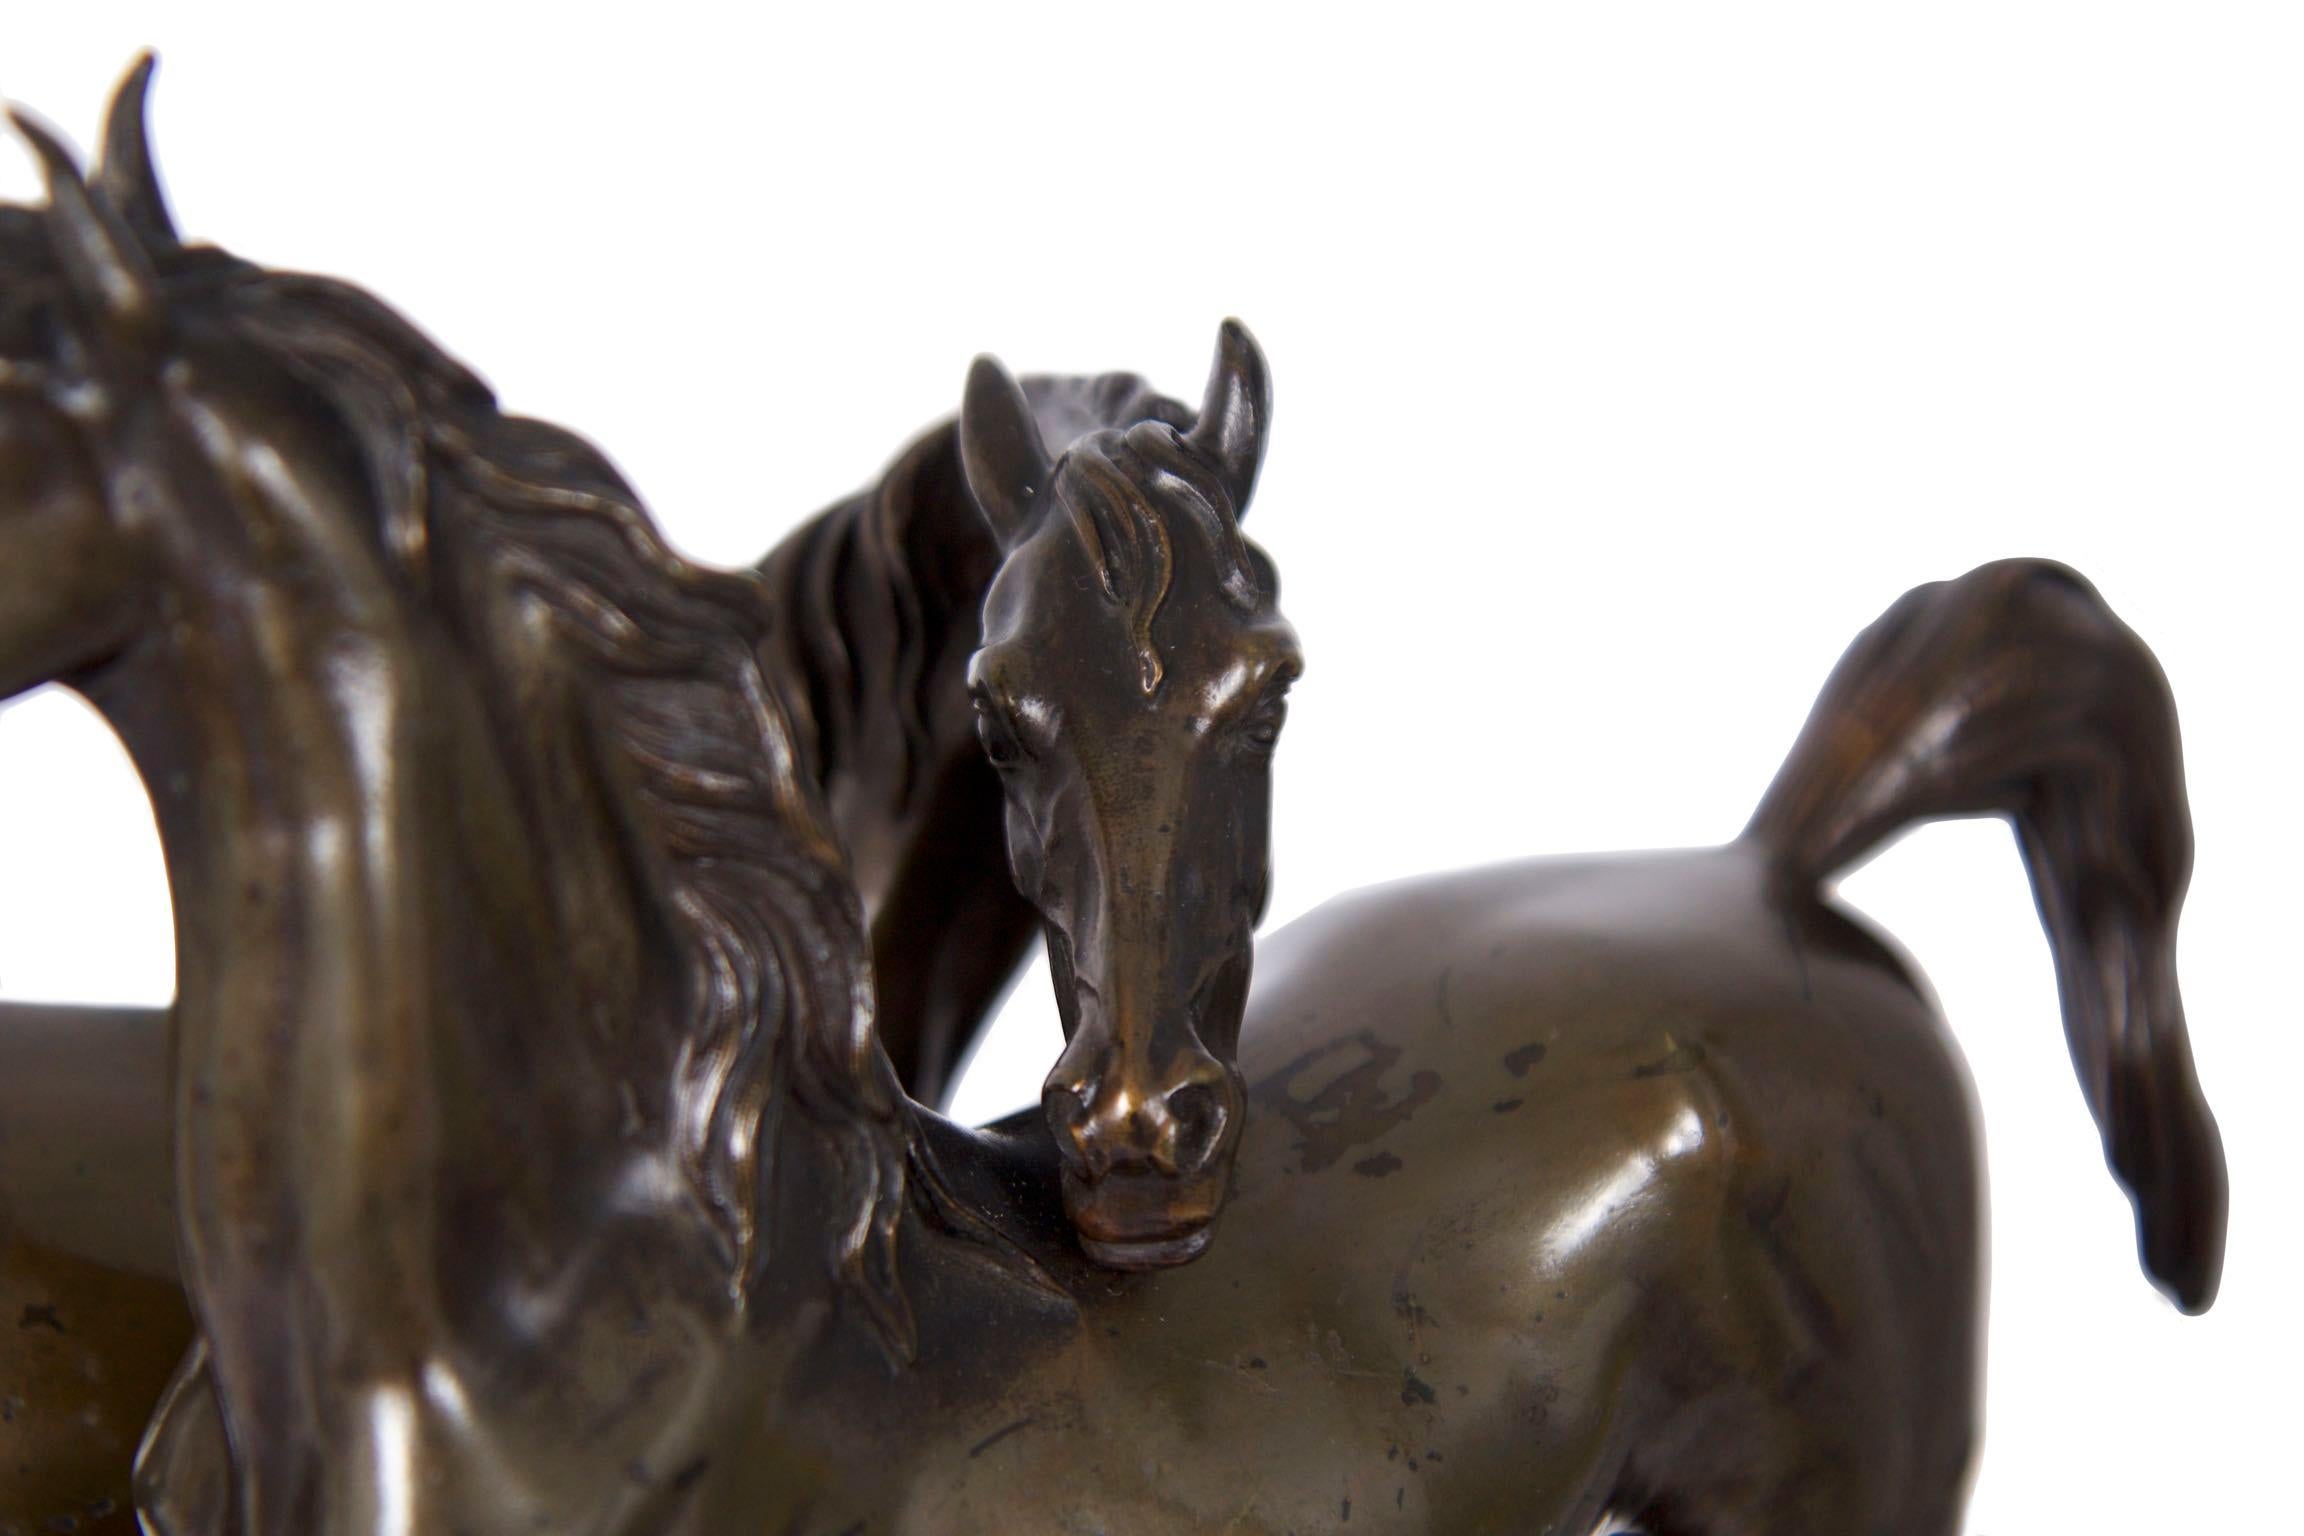 French Marble and Black Slate Mantel Clock with Equestrian Sculpture Group, circa 1865